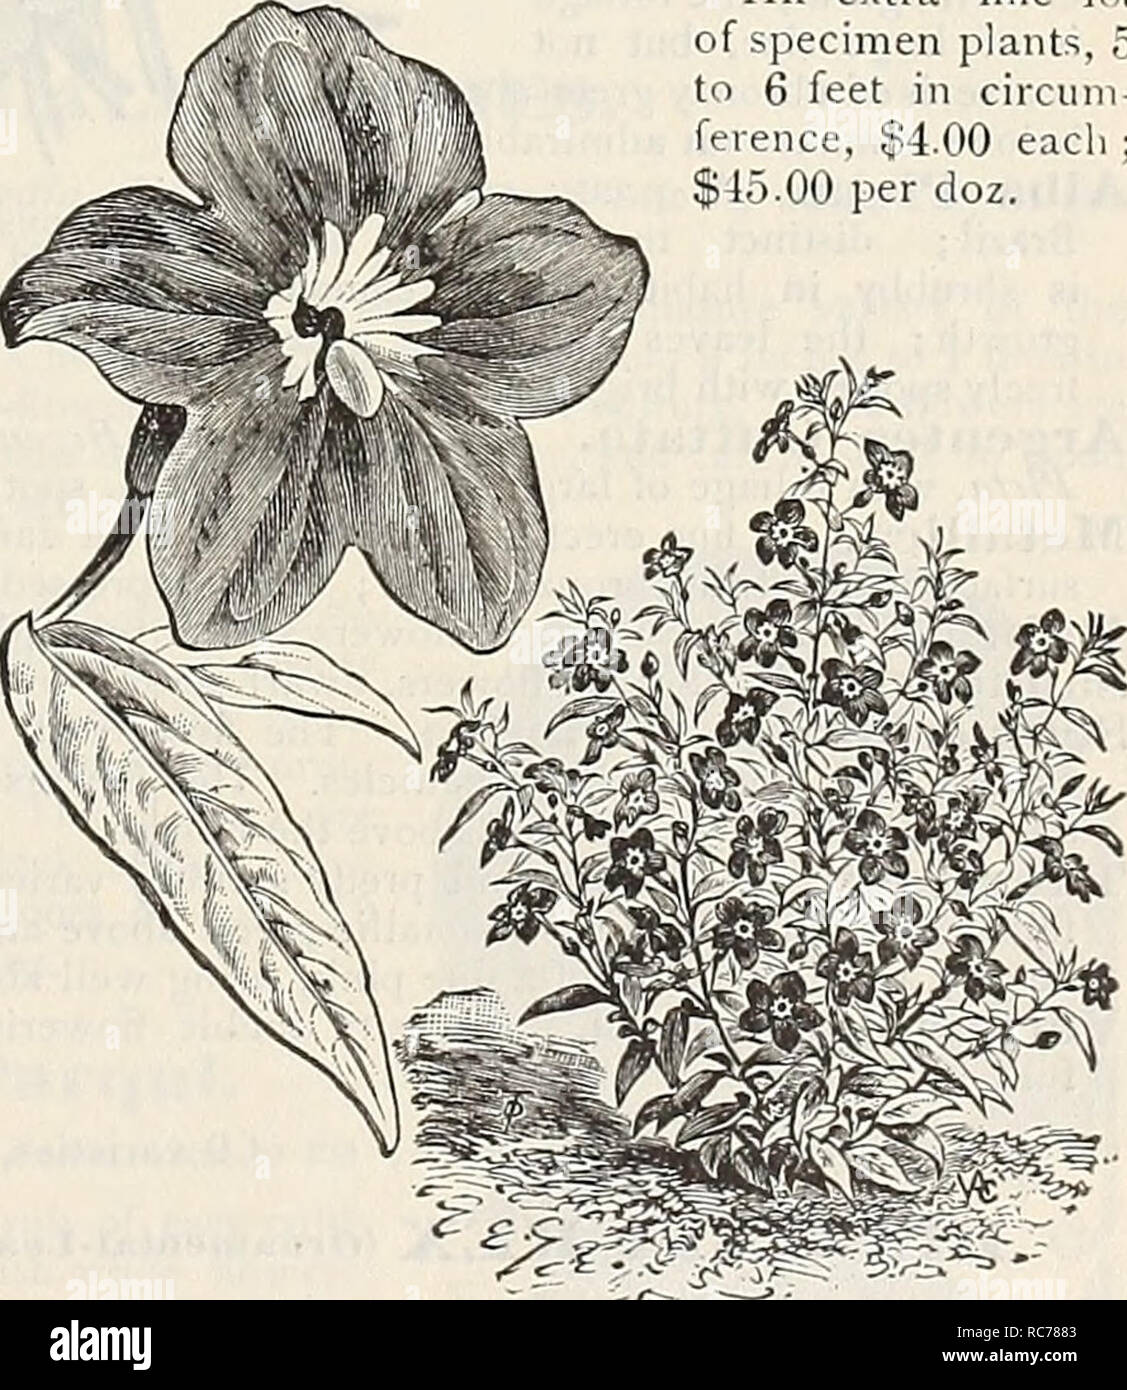 . Dreer's garden calendar : 1900. Seeds Catalogs; Nursery stock Catalogs; Gardening Equipment and supplies Catalogs; Flowers Seeds Catalogs; Vegetables Seeds Catalogs; Fruit Seeds Catalogs. BOUGAINVILLEA SaNDFRIANA of'.pecimen plants, 5 to 6 feet in circum- feience, $4.00 each ; 5 00 per doz. BROl^AEEIA SPECIOSA MAJOR. A giant flowering form of this beautiful genus, flowering continually summer and winter, which may be grown either in the border or as a pot plant. Its beautiful ultramarine blue color, which is rare in all classes of plants, makes it especially valuable and desirable. (See cut. Stock Photo